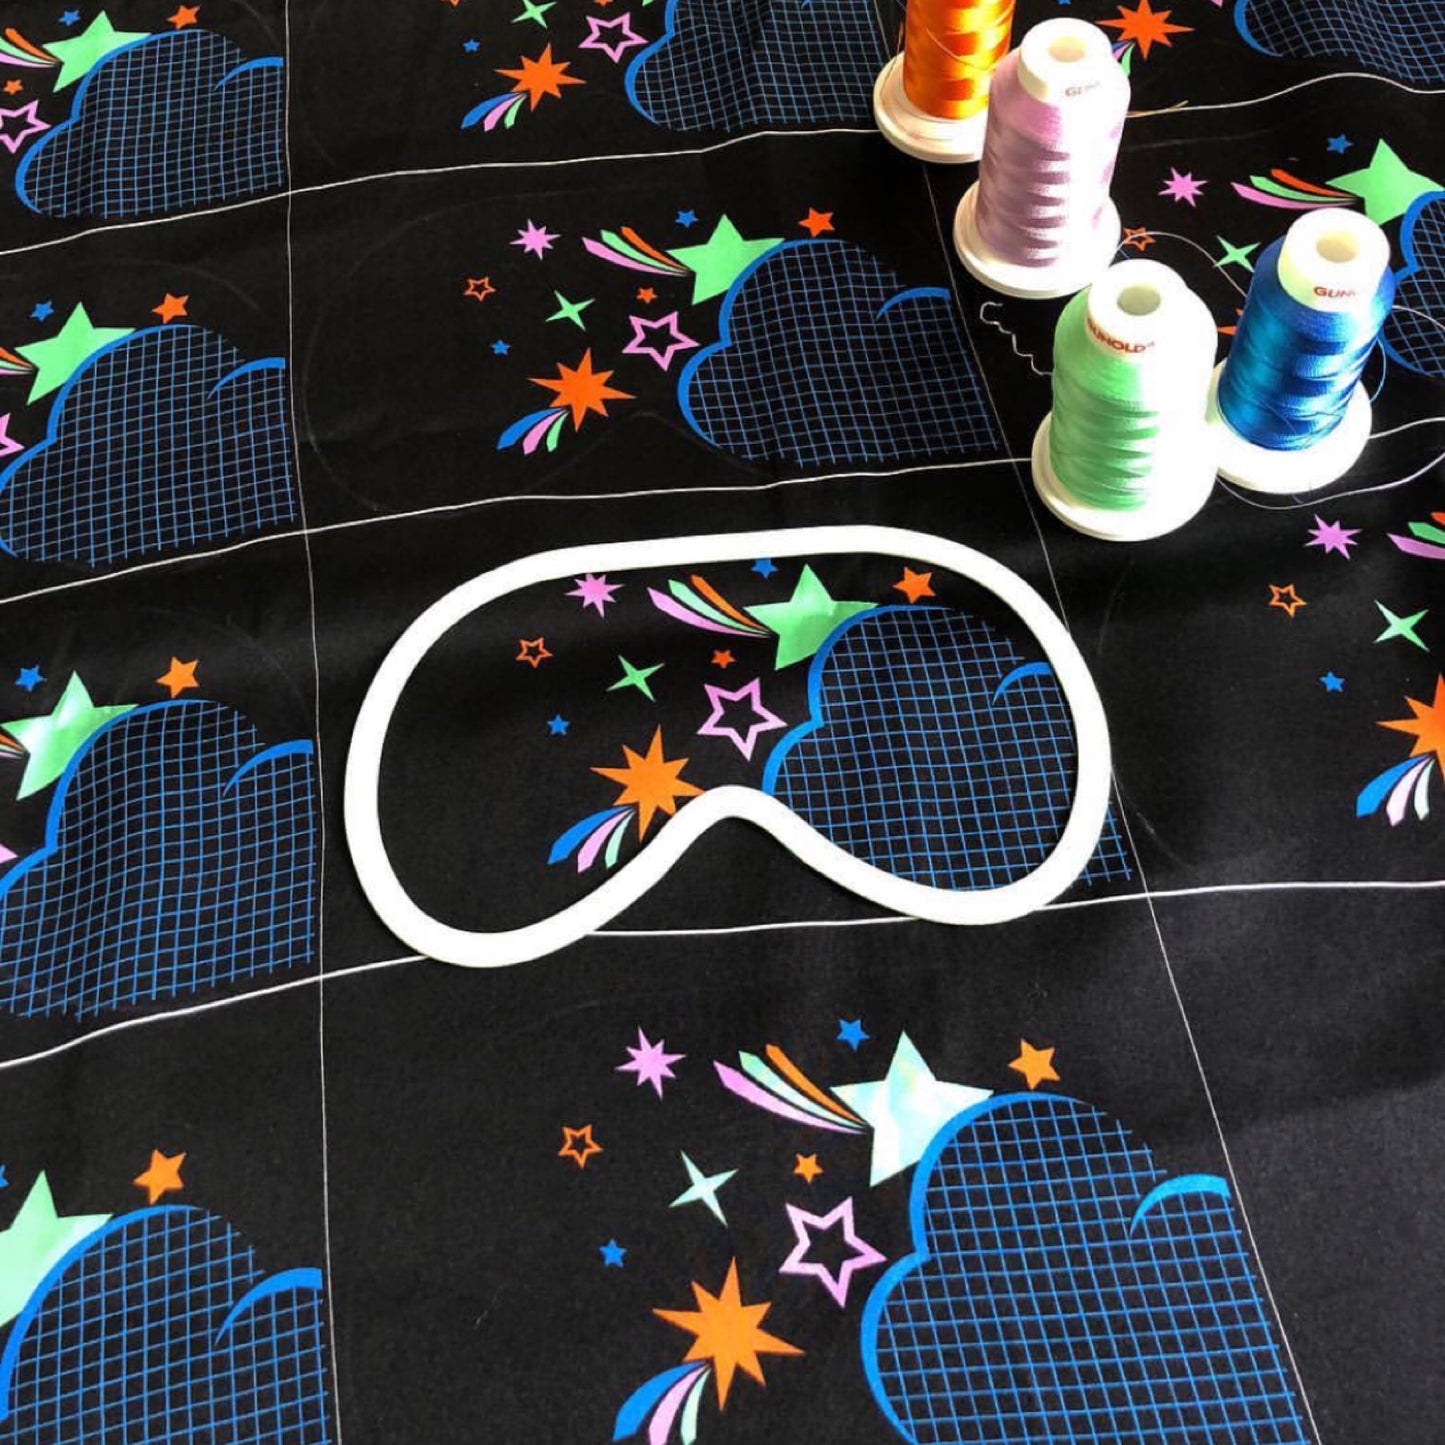 A length of the printed silk satin for the disco nap eye mask, before they are embroidered and cut. Four embroidery threads are placed on the silk fabric